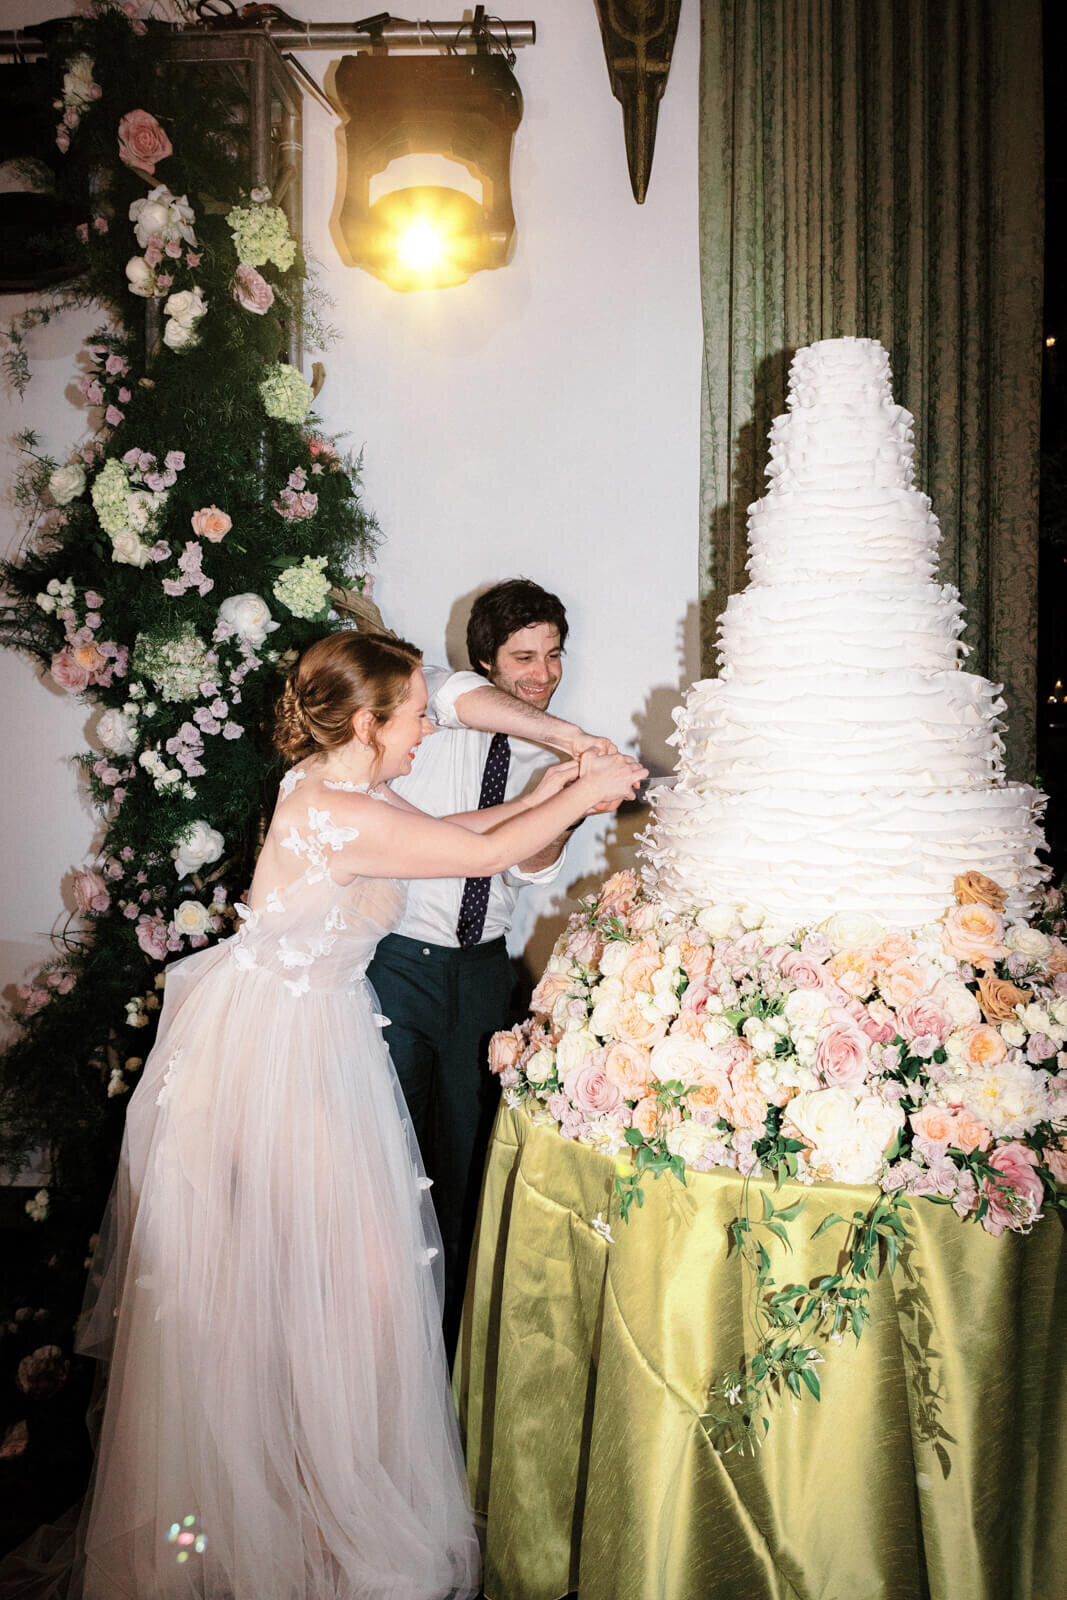 The bride and the groom are both cutting a huge white, six-layer wedding cake, with many flowers at the bottom.